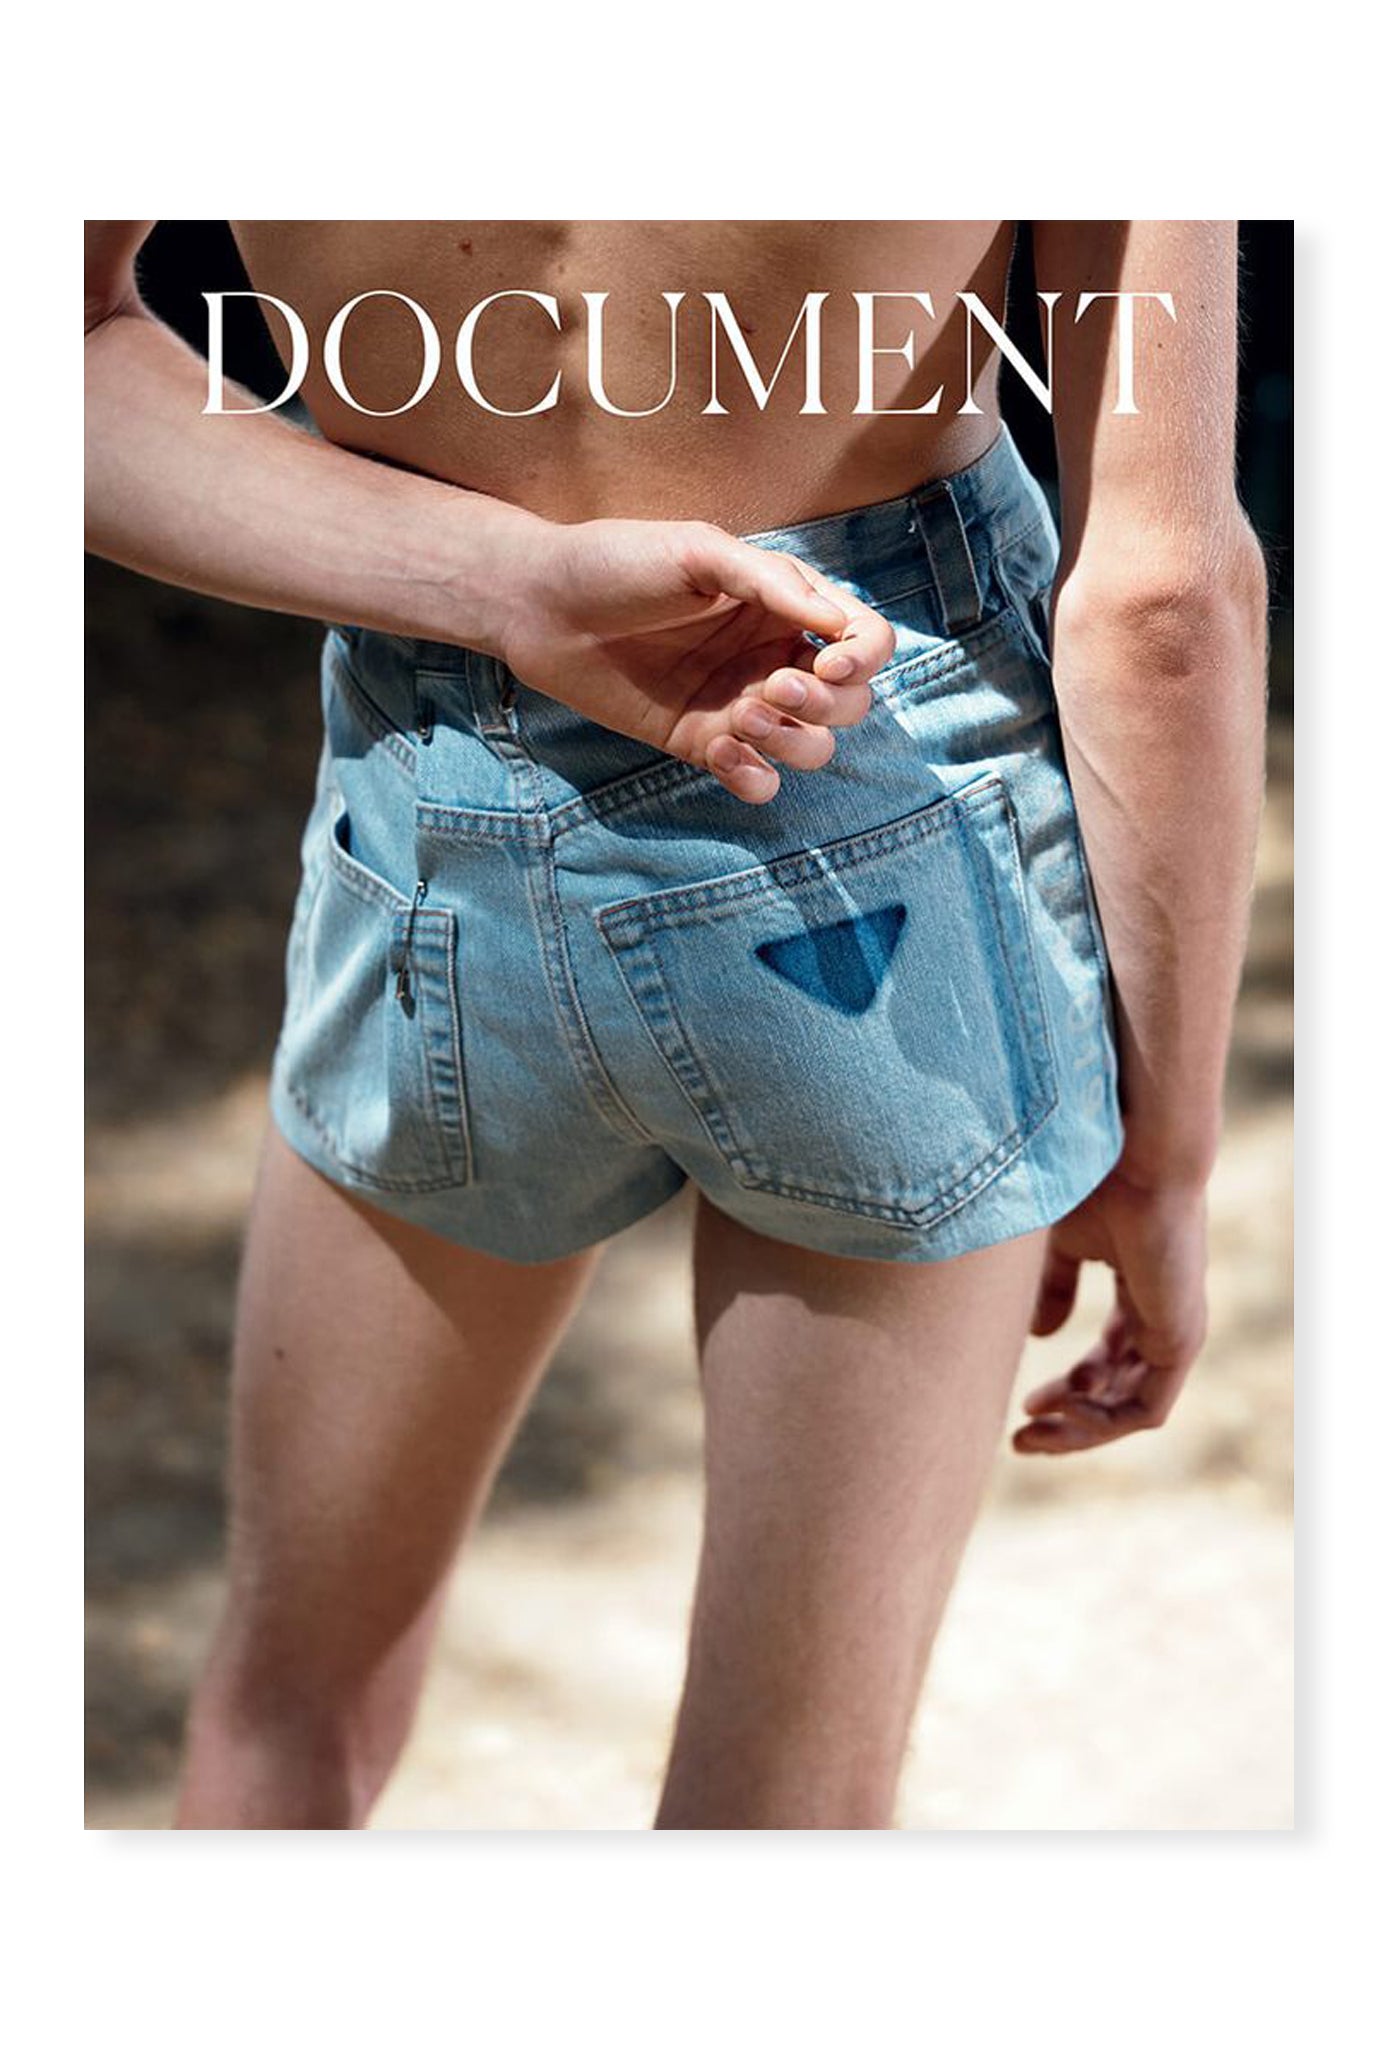 Document Journal, Issue 13